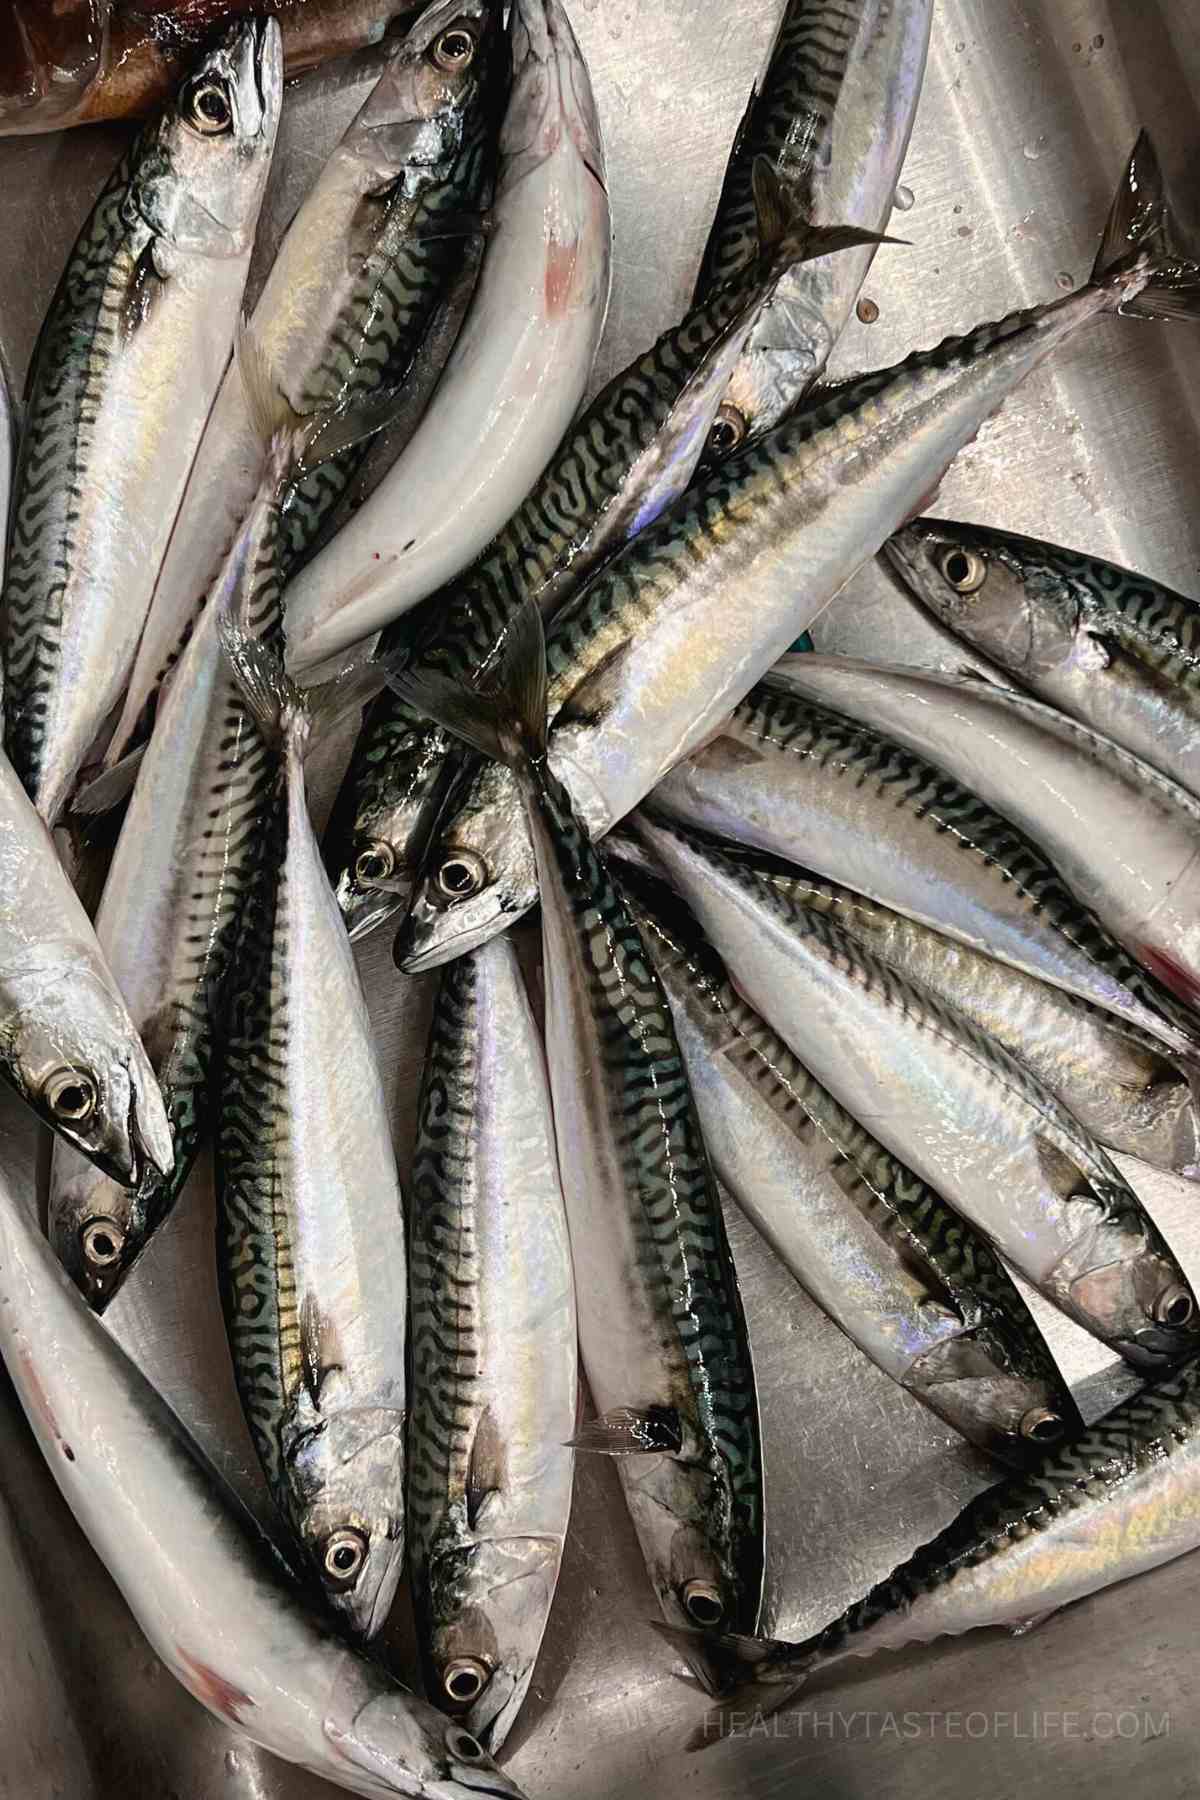 Fresh mackerel in a sink ready to be cleaned and cut.